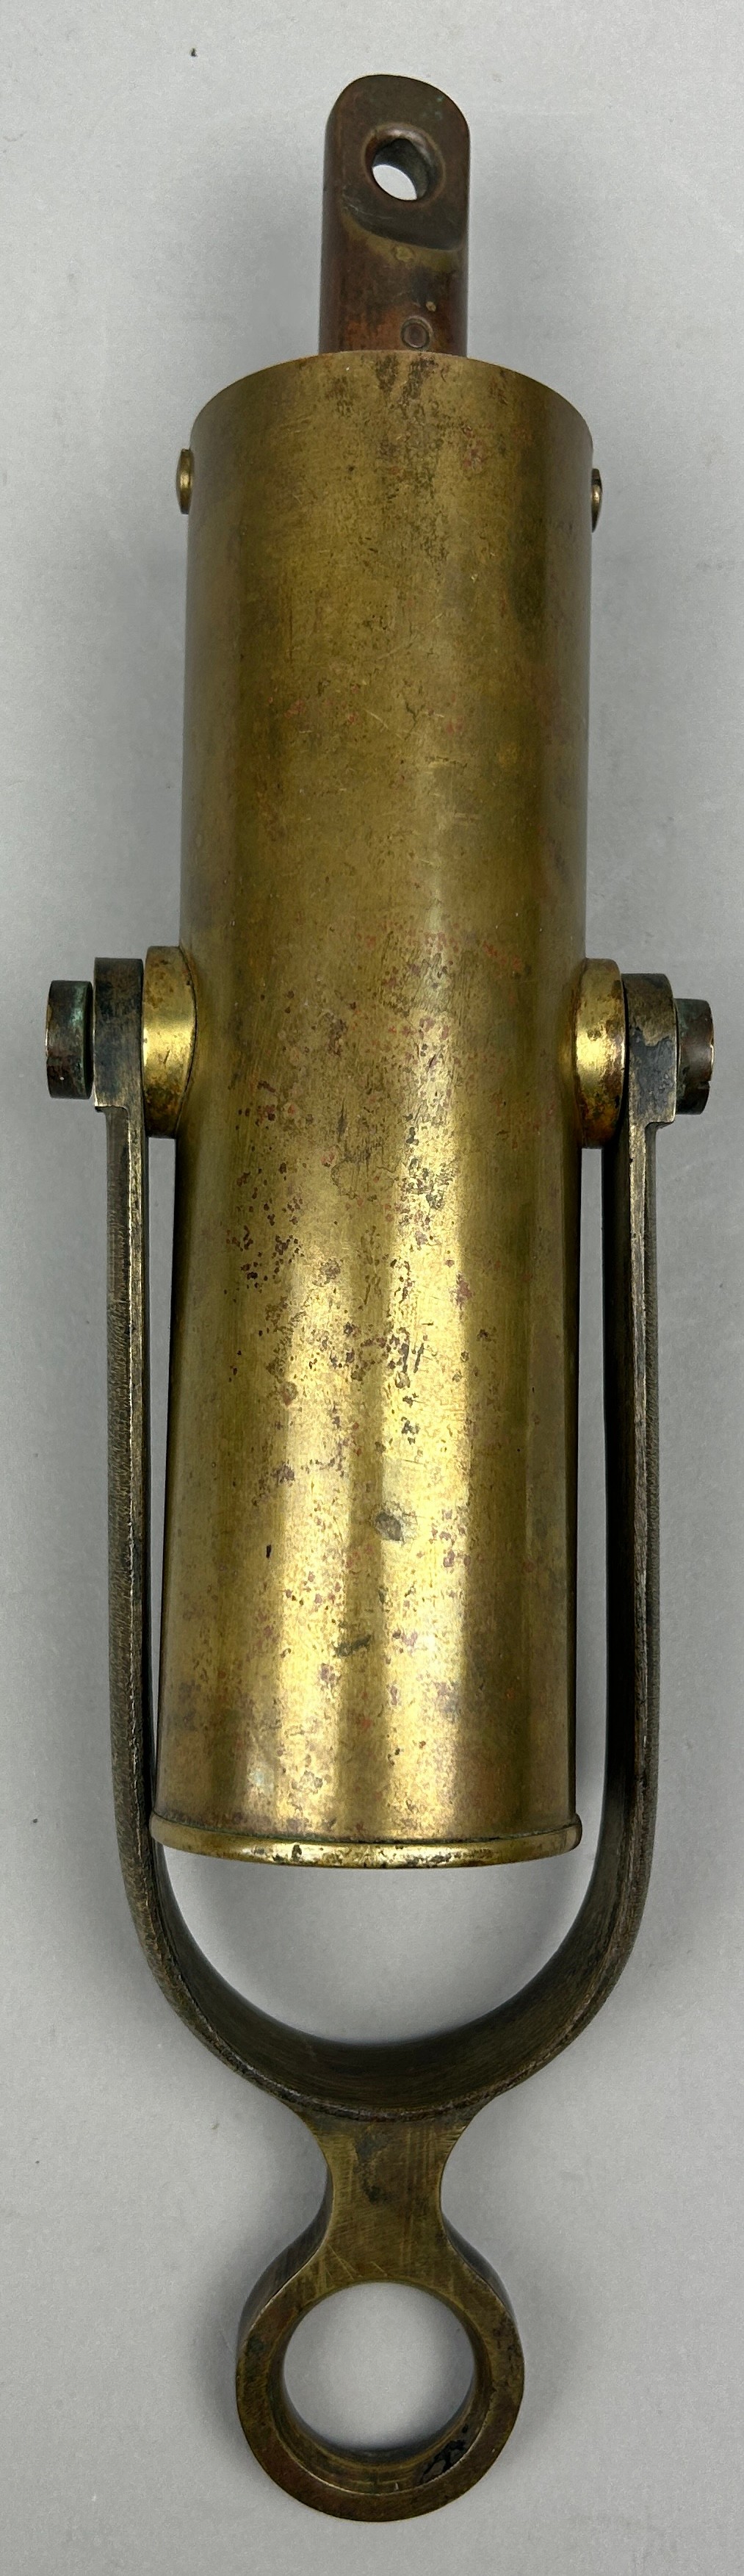 A LATE 19TH CENTURY BRASS TAFFRAIL BY JOHN BLISS AND CO - Image 3 of 4